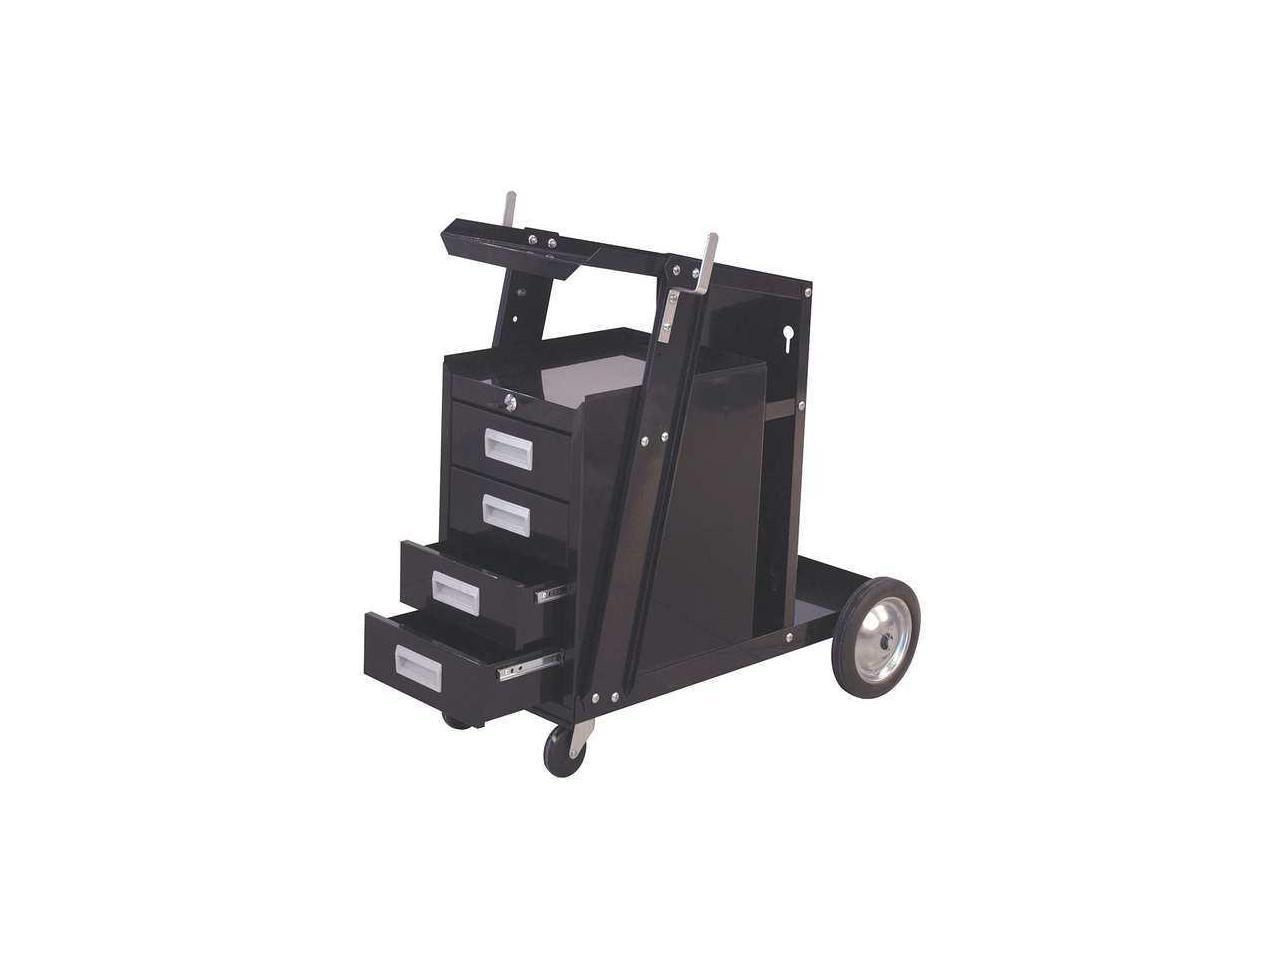 Westward 19D984 Welding Cart With Drawers for sale online 